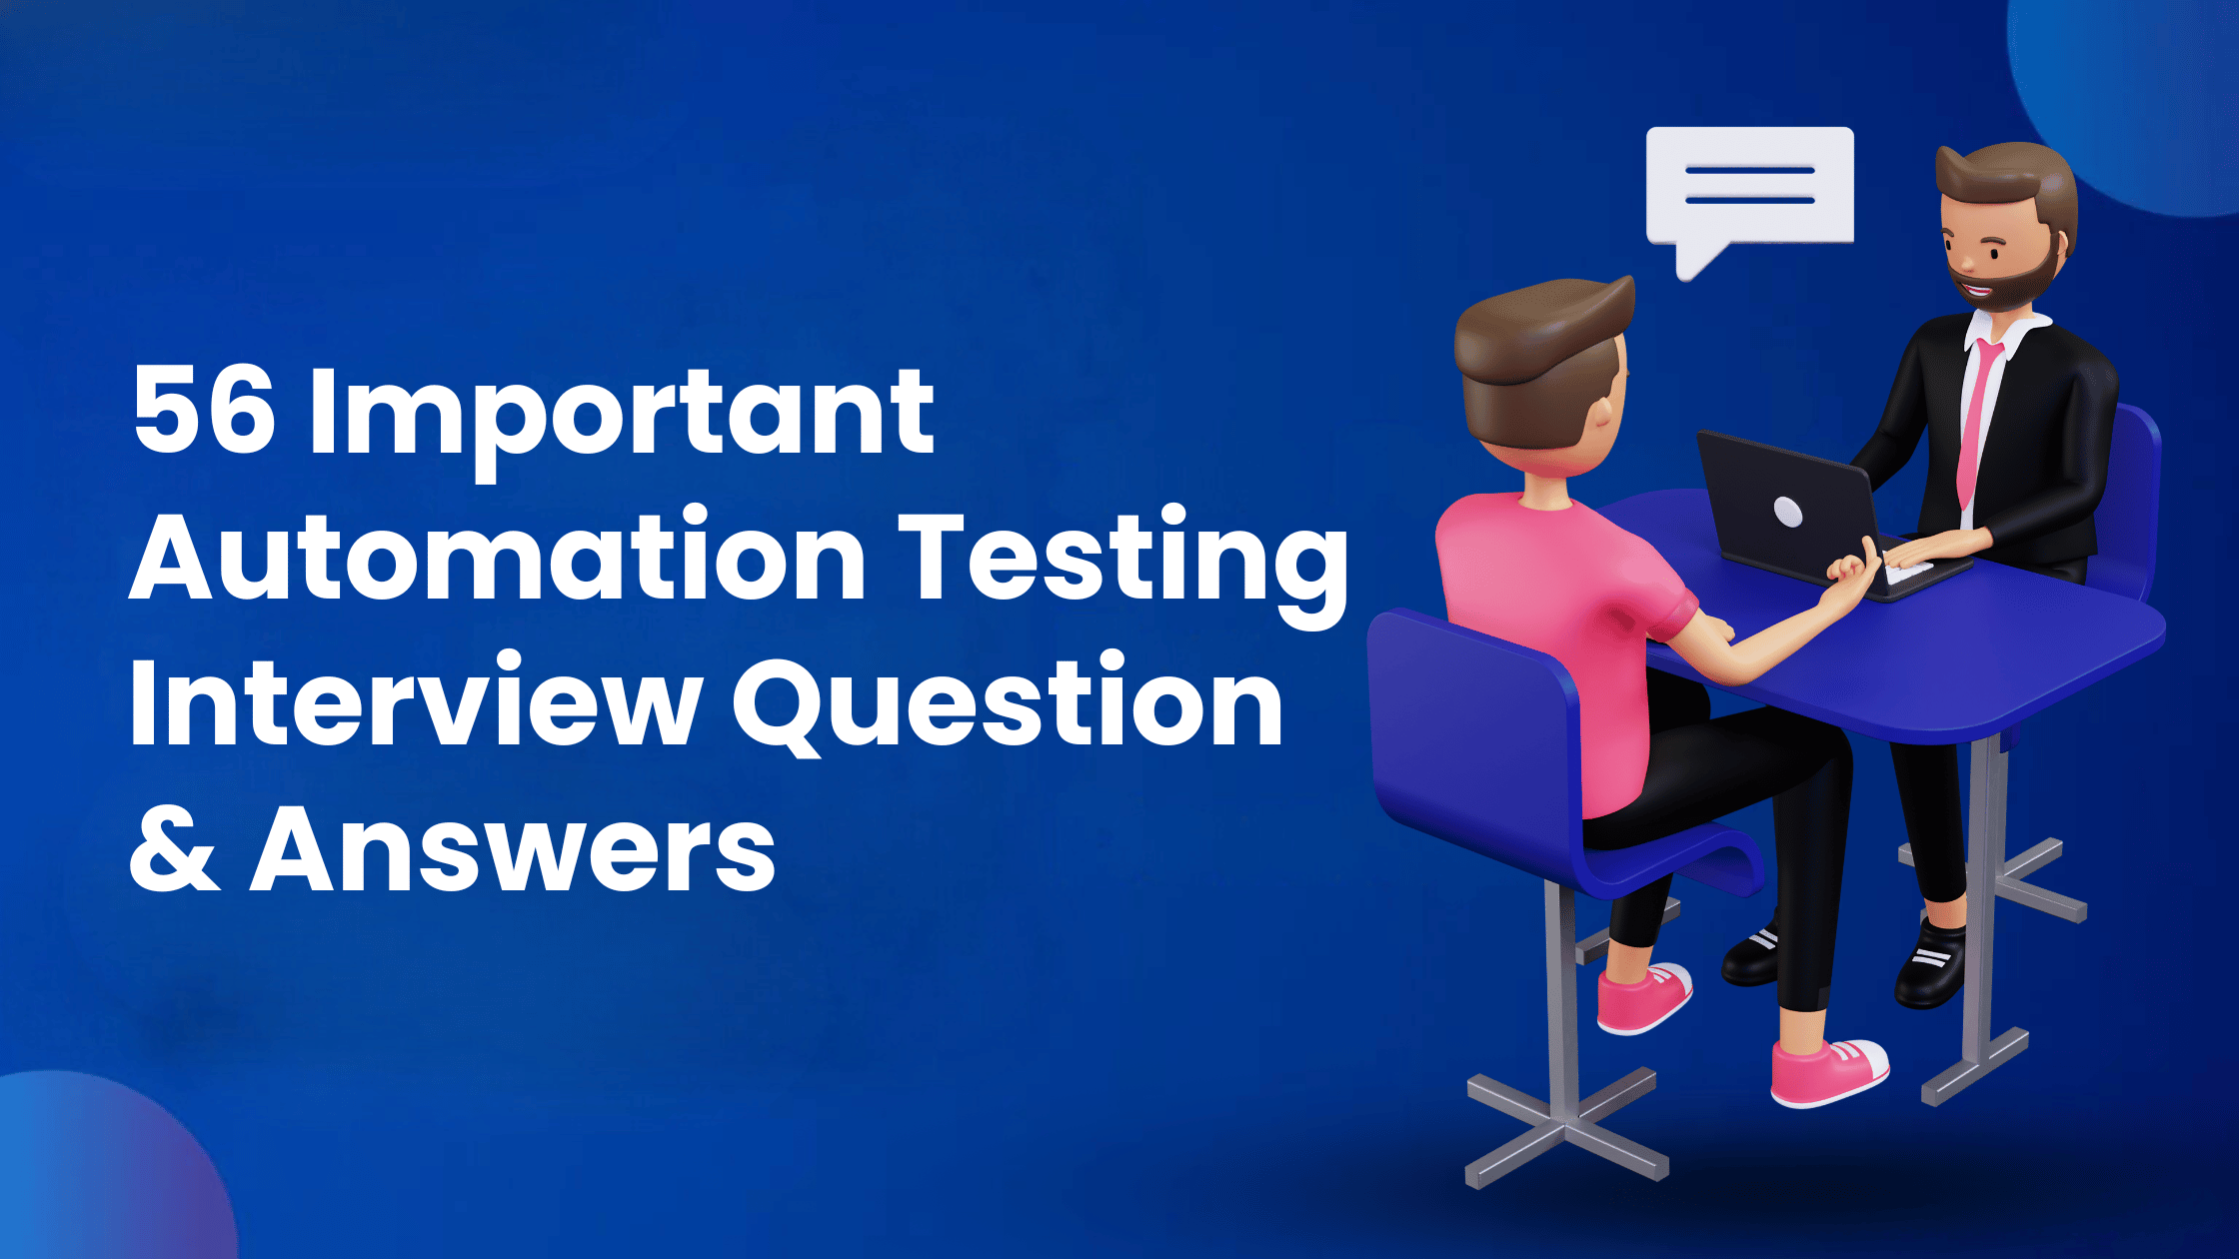 56 Important Automation Testing Interview Questions & Answers